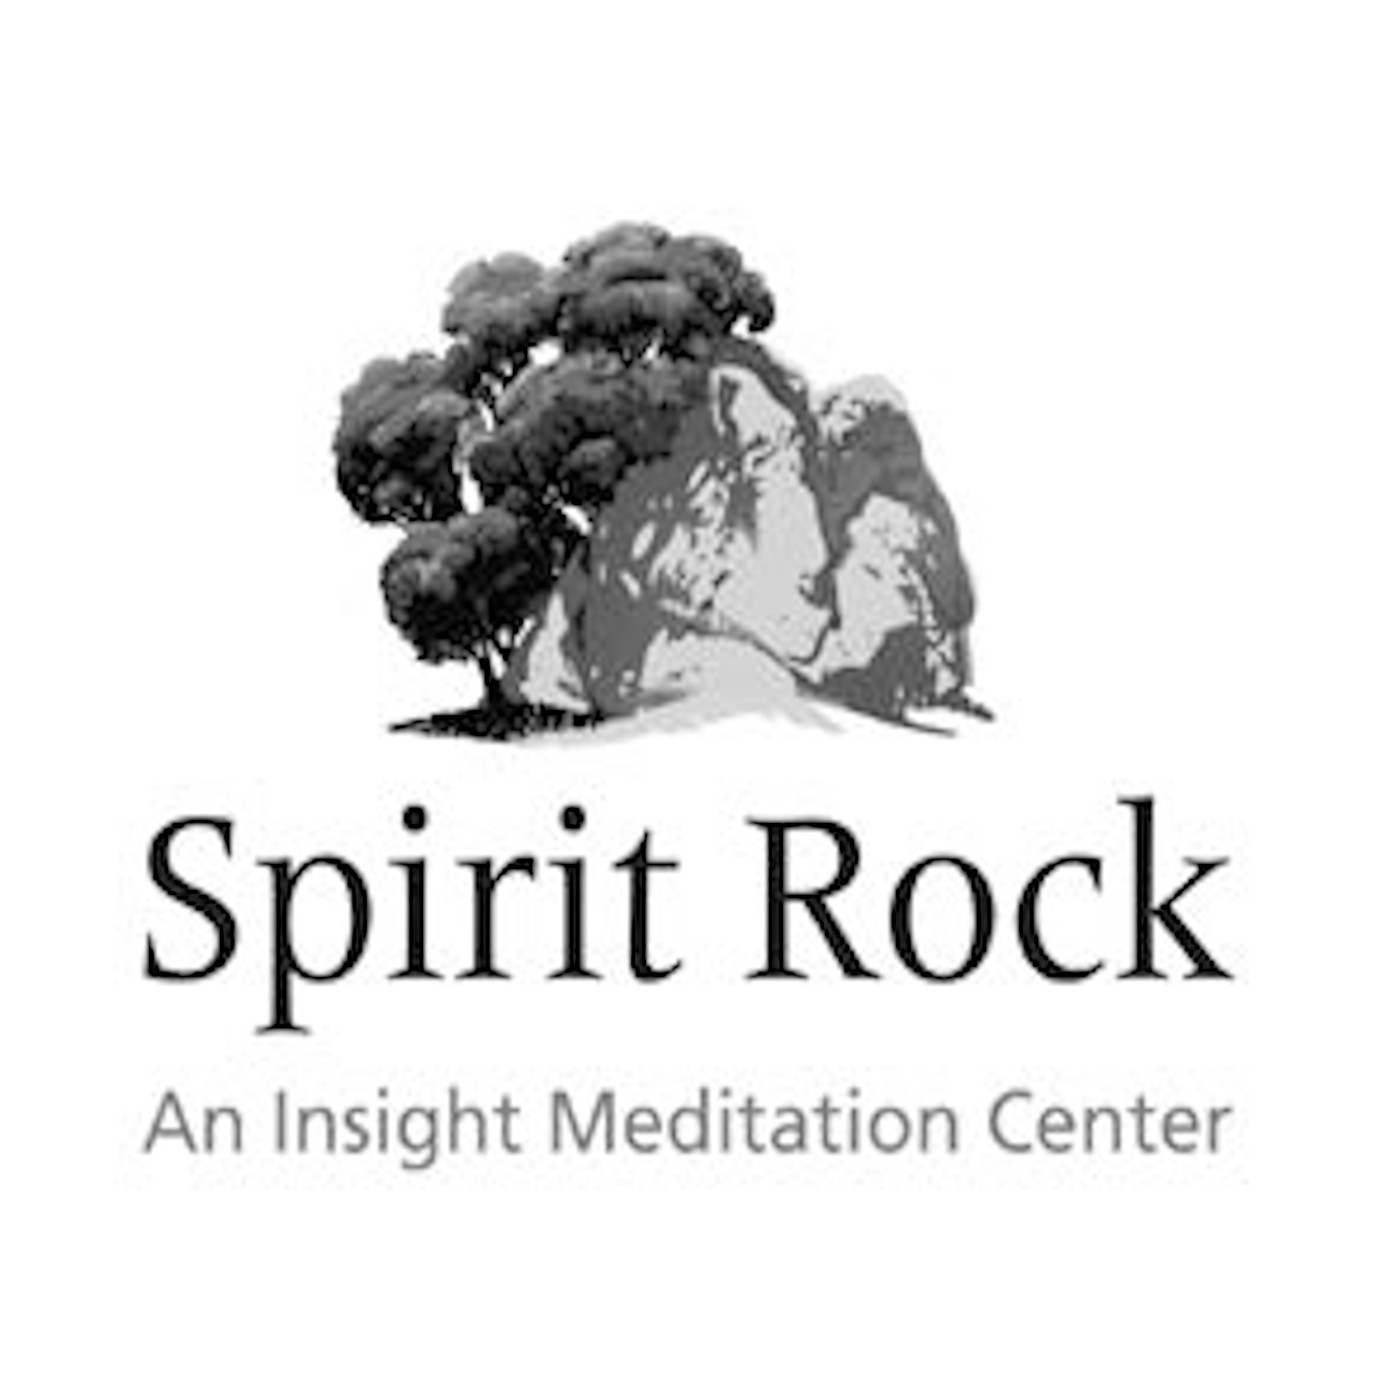 Matthew Brensilver: Language is the hammer and every problem, a nail (Retreat at Spirit Rock)